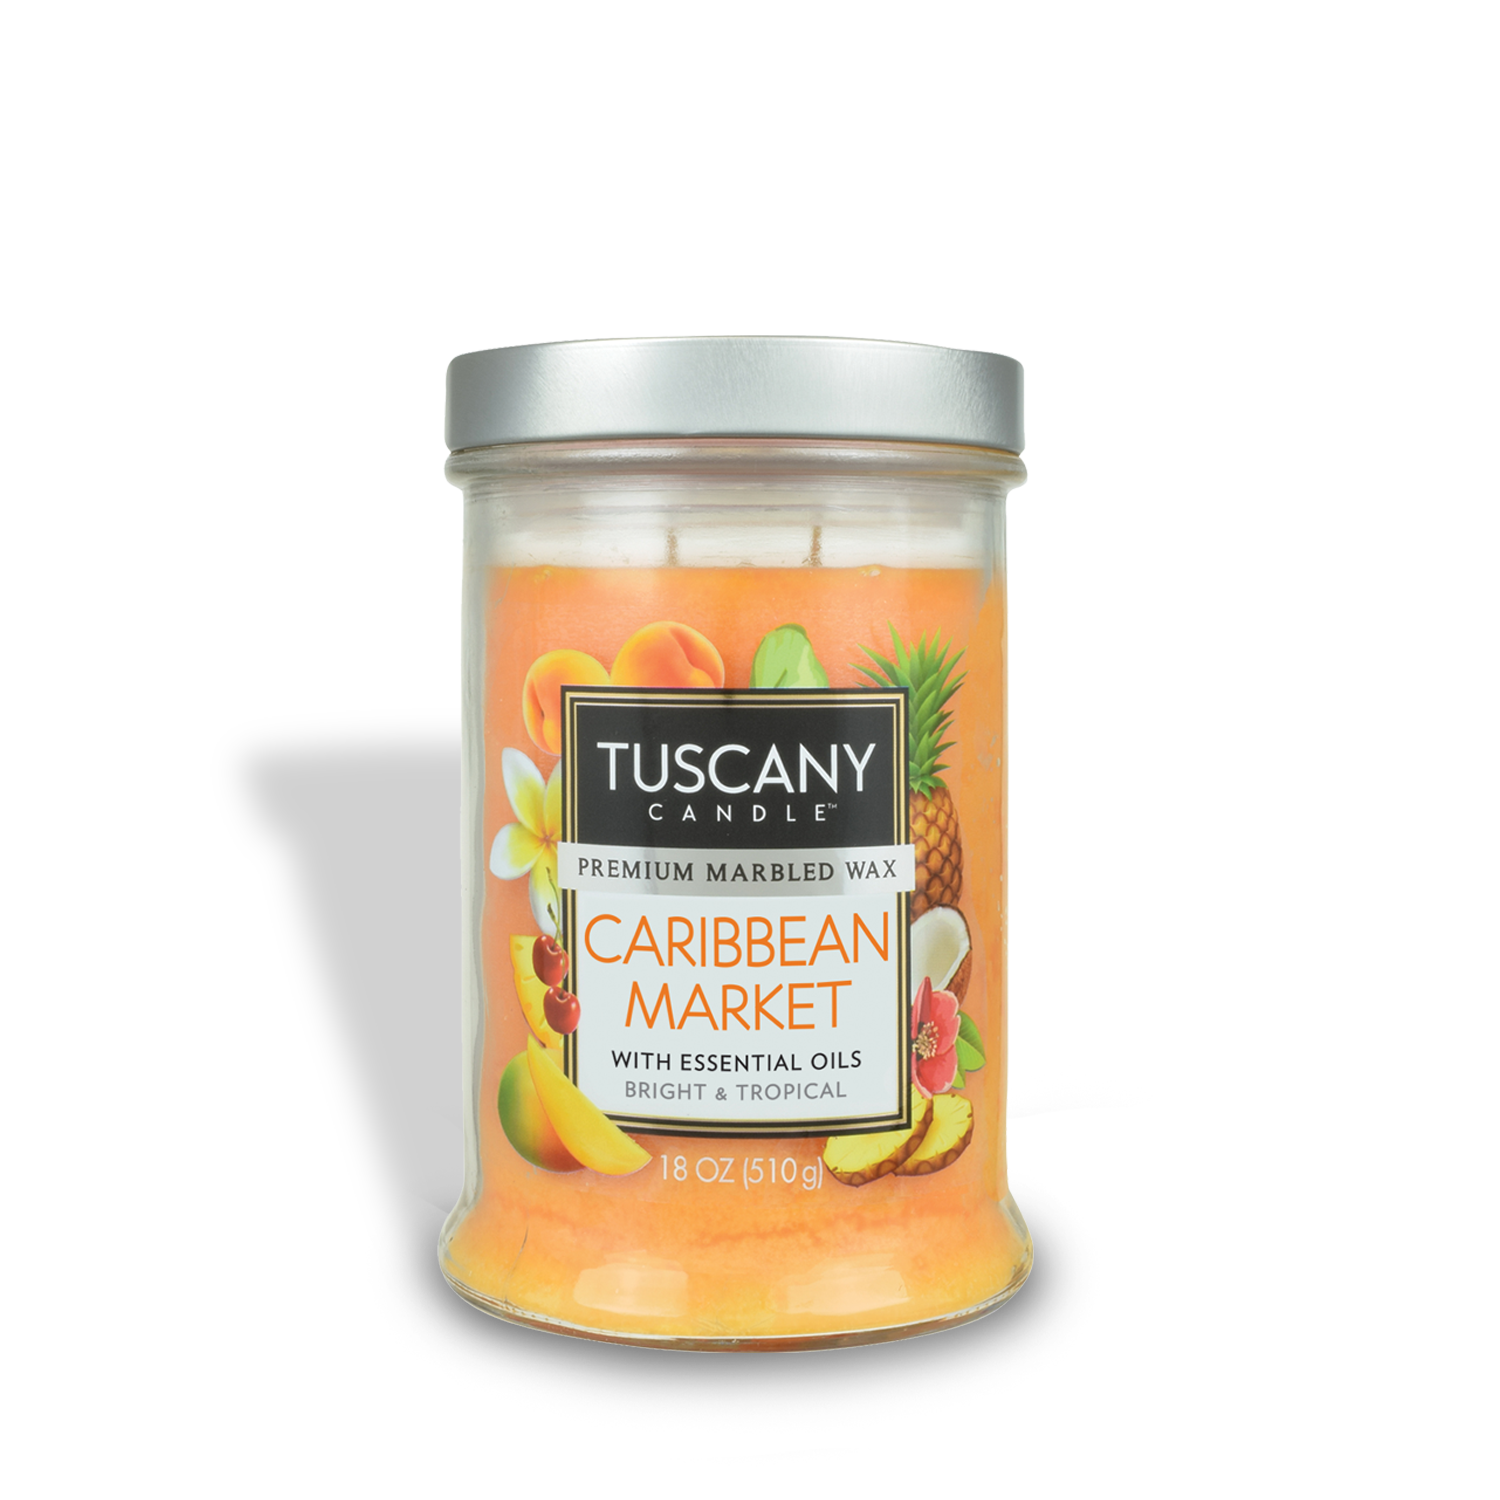 Experience the essence of the Caribbean with our Tuscany Candle's Caribbean Market Long-Lasting Scented Jar Candle (18 oz). Infused with tropical fruits, this candle transports you to a vibrant market bursting with enticing aromas.